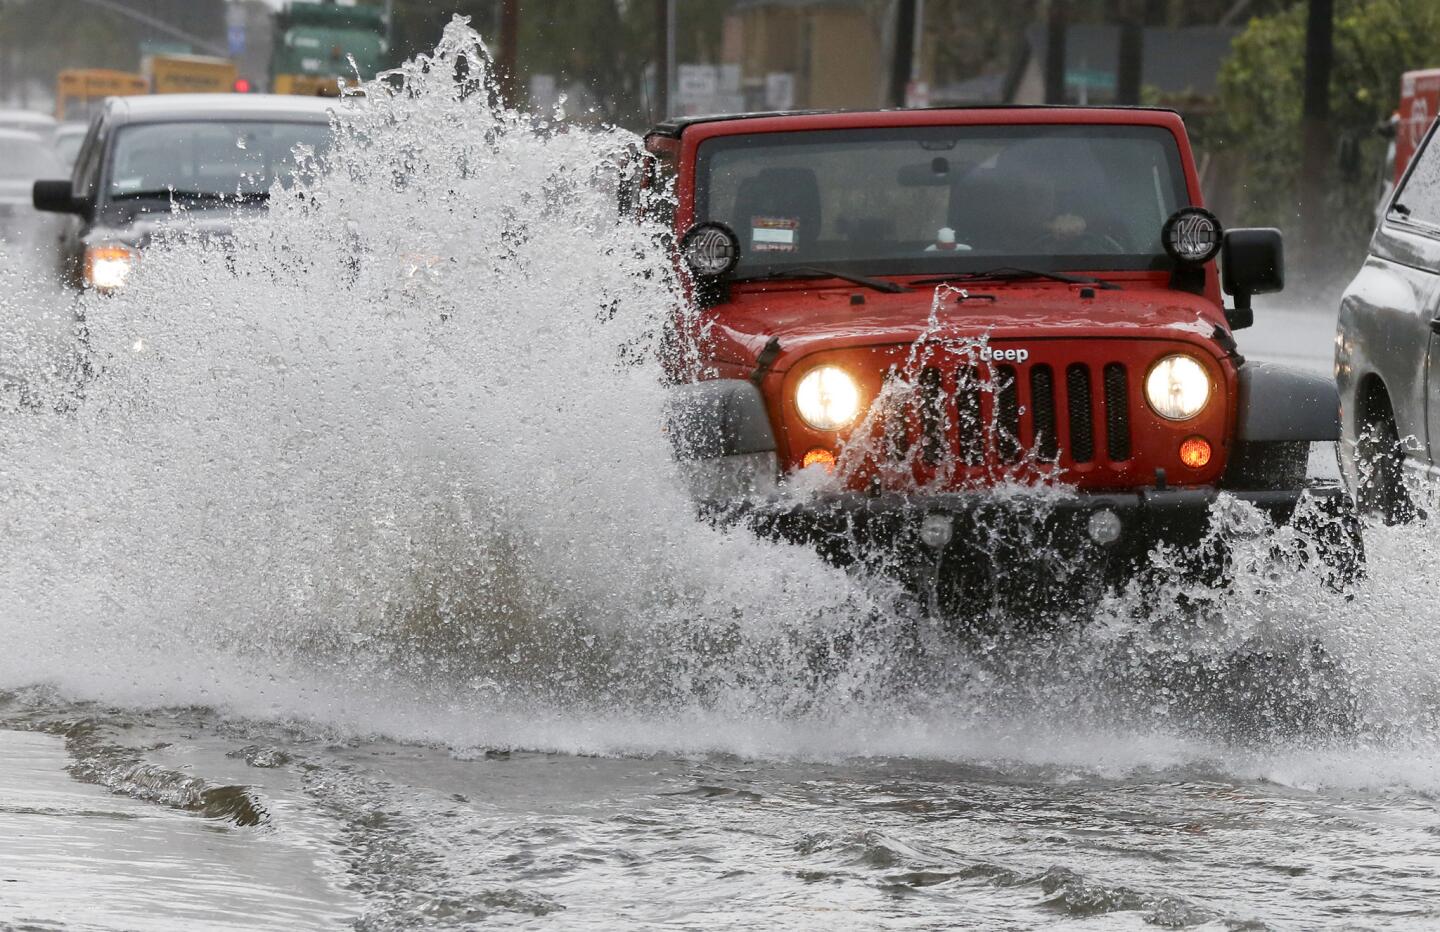 Motorists navigate the flooded lanes of northbound Fairview Street in Santa Ana.